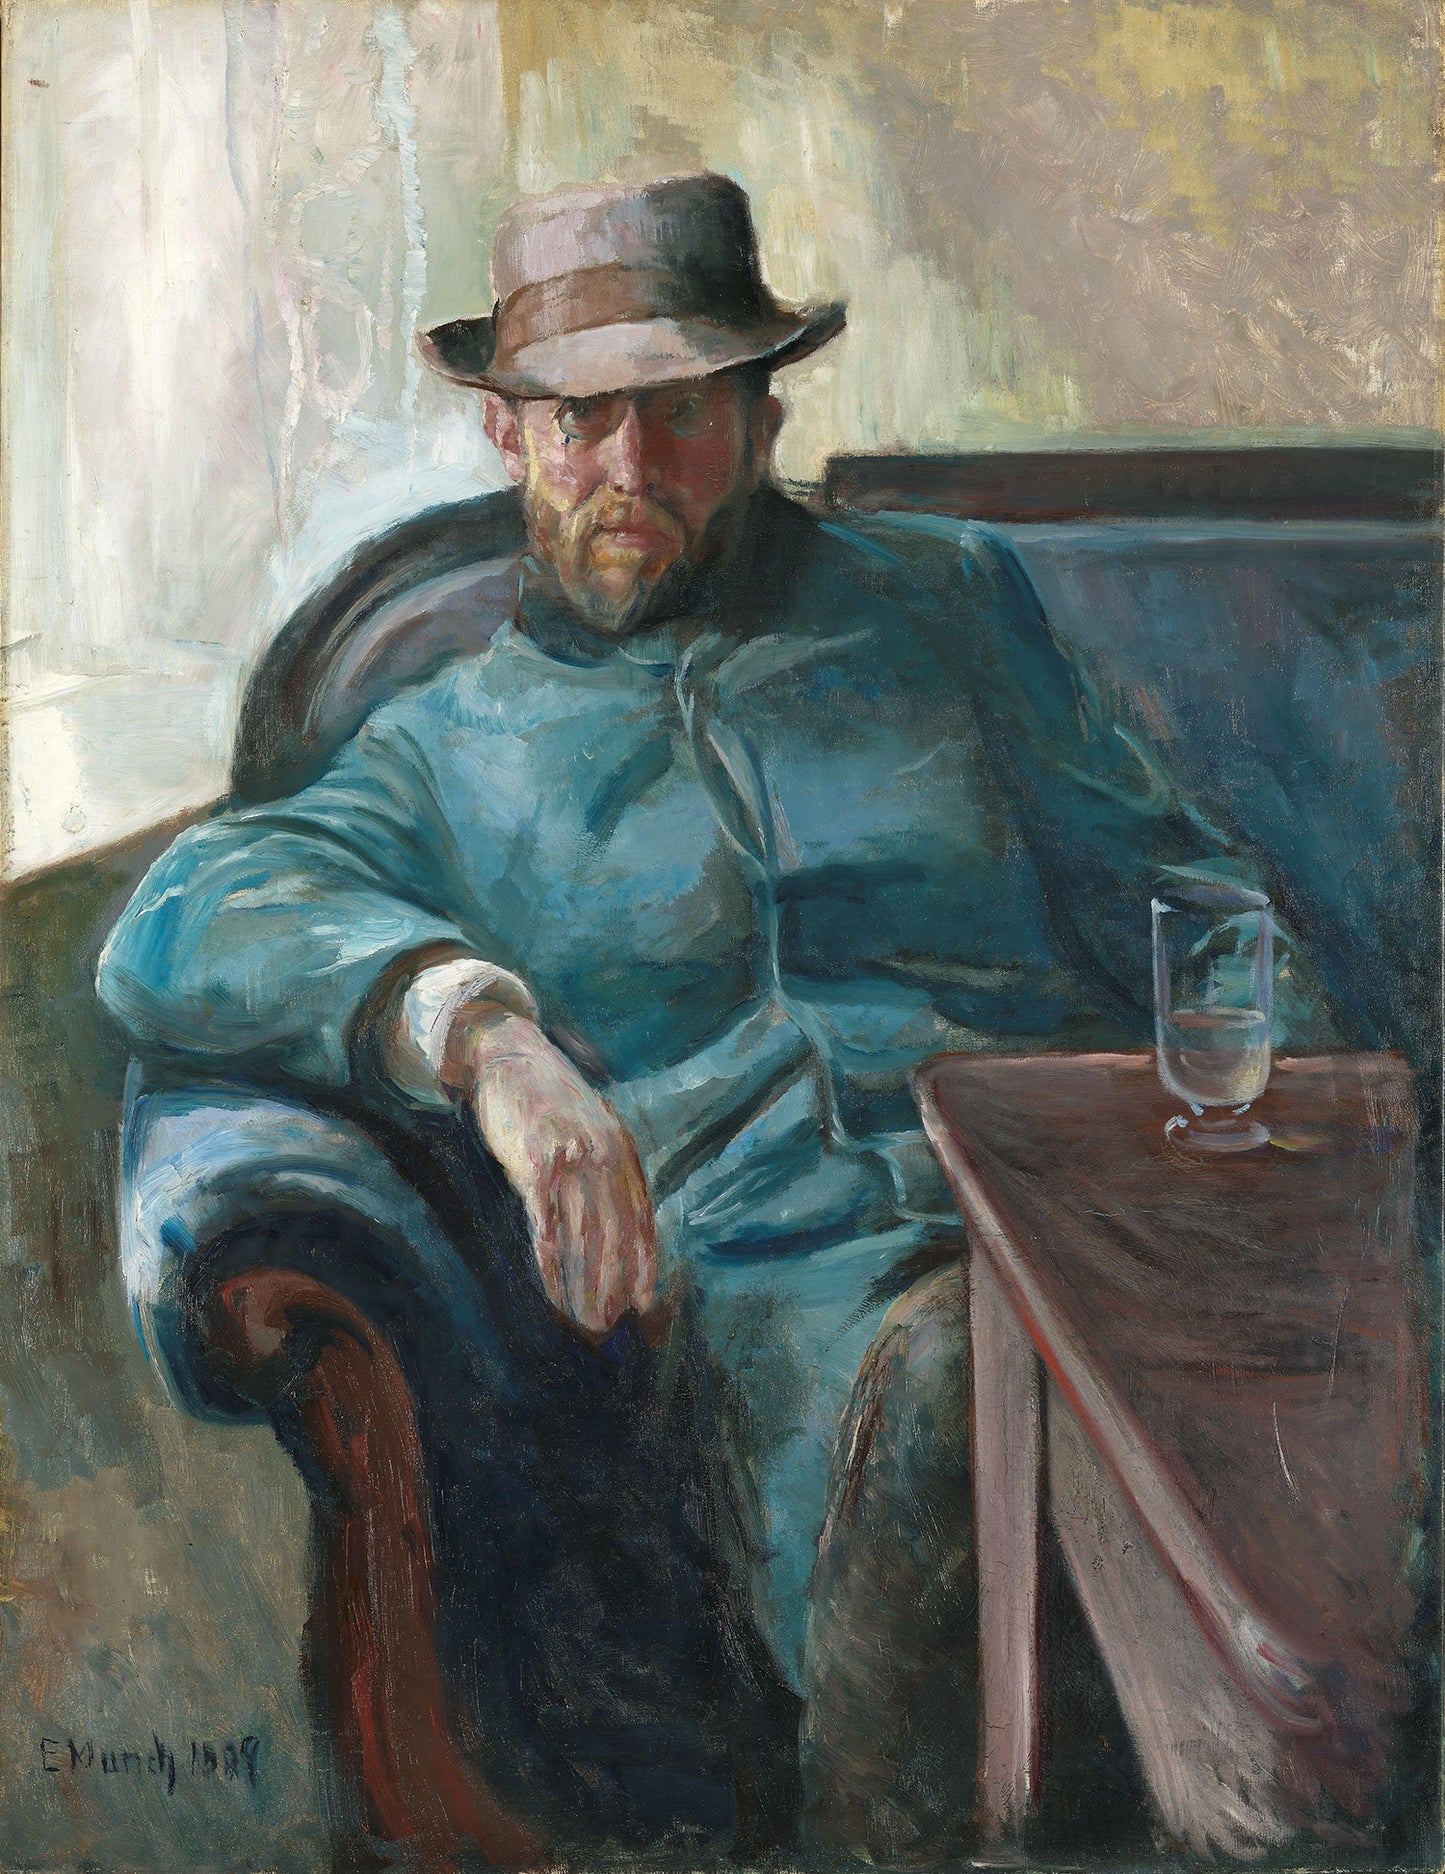 Hans Jager - A portrait painting by Edvard Munch